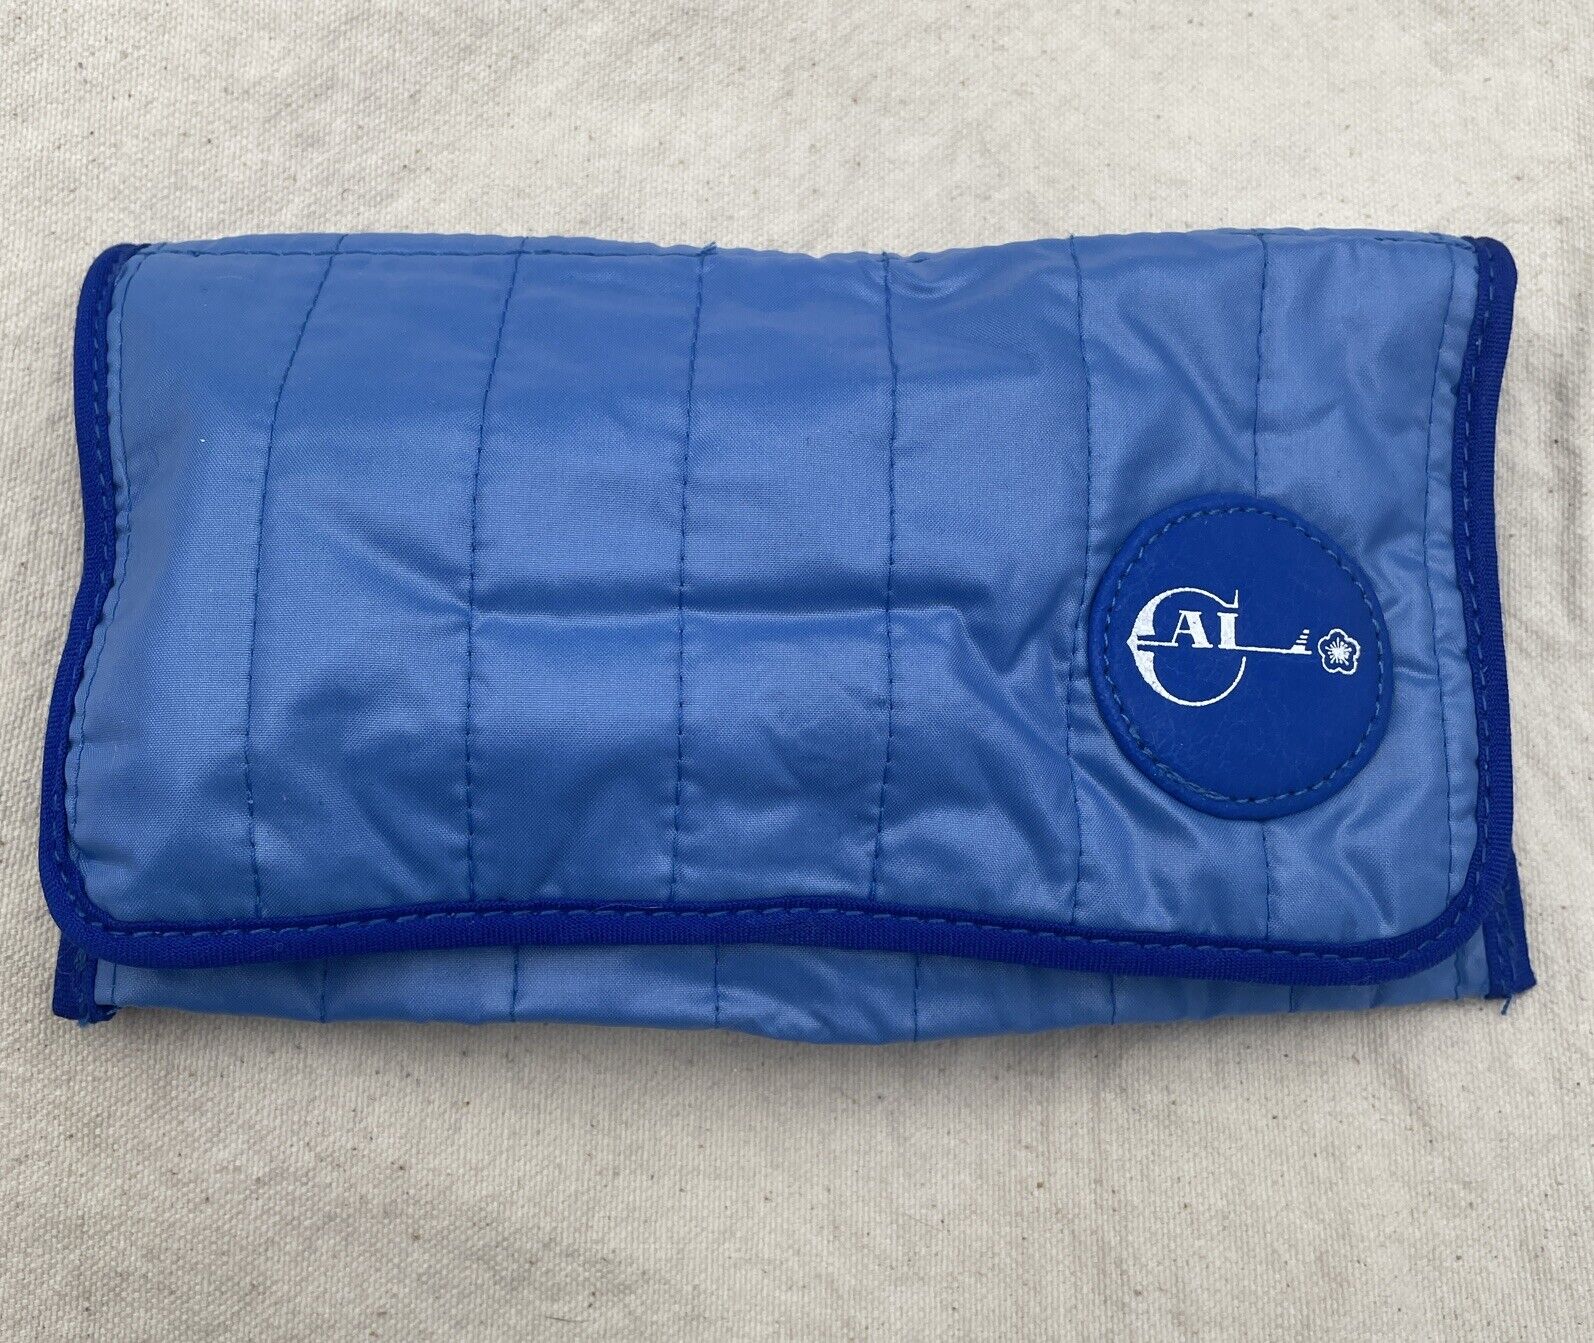 China Airlines Amenity Kit Toiletry Bag Vintage